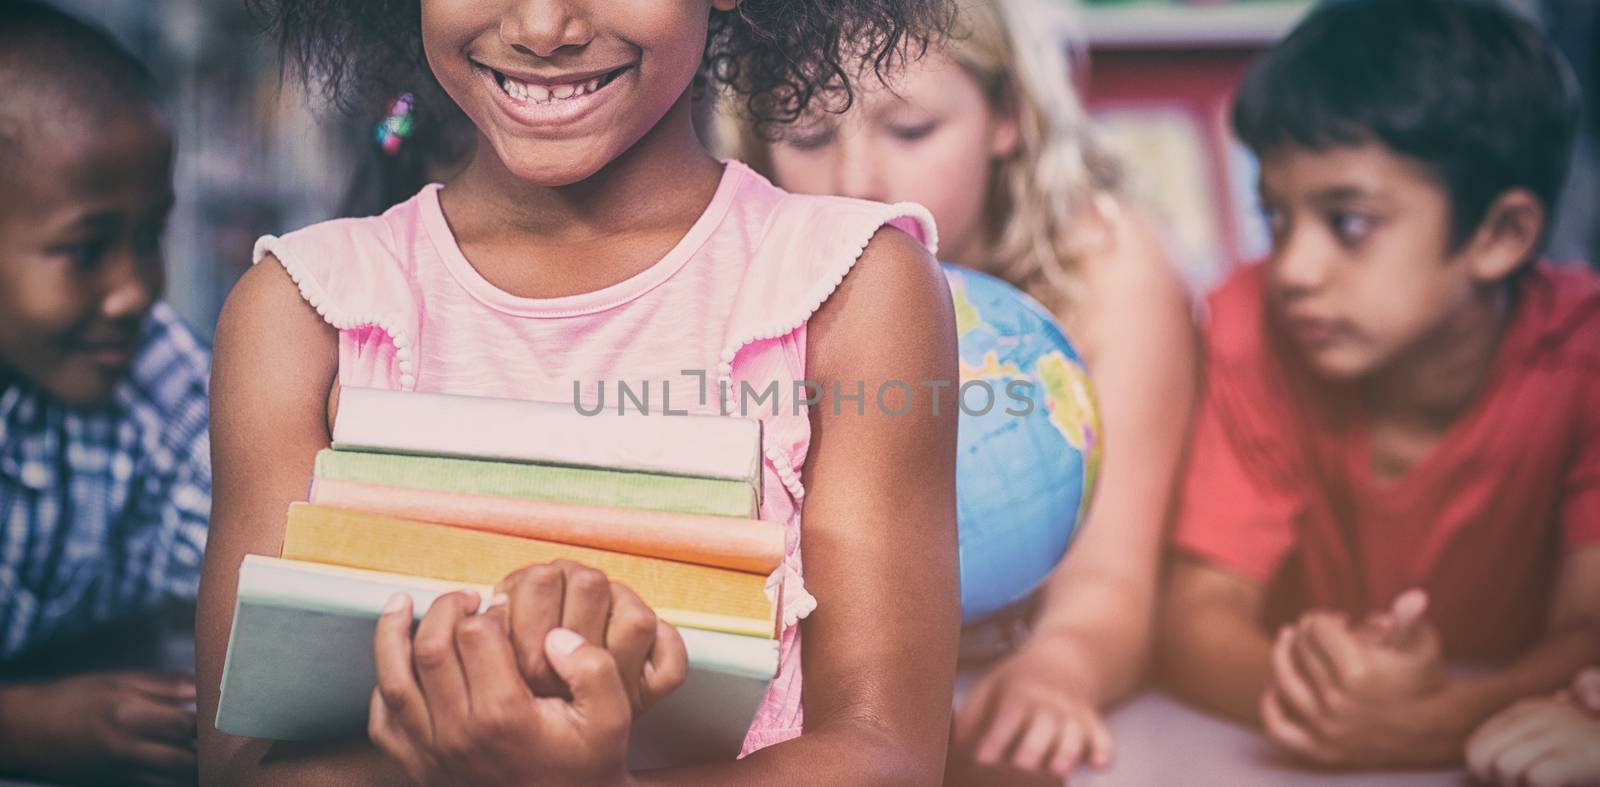 Portrait of smiling girl holding books against classmates in library